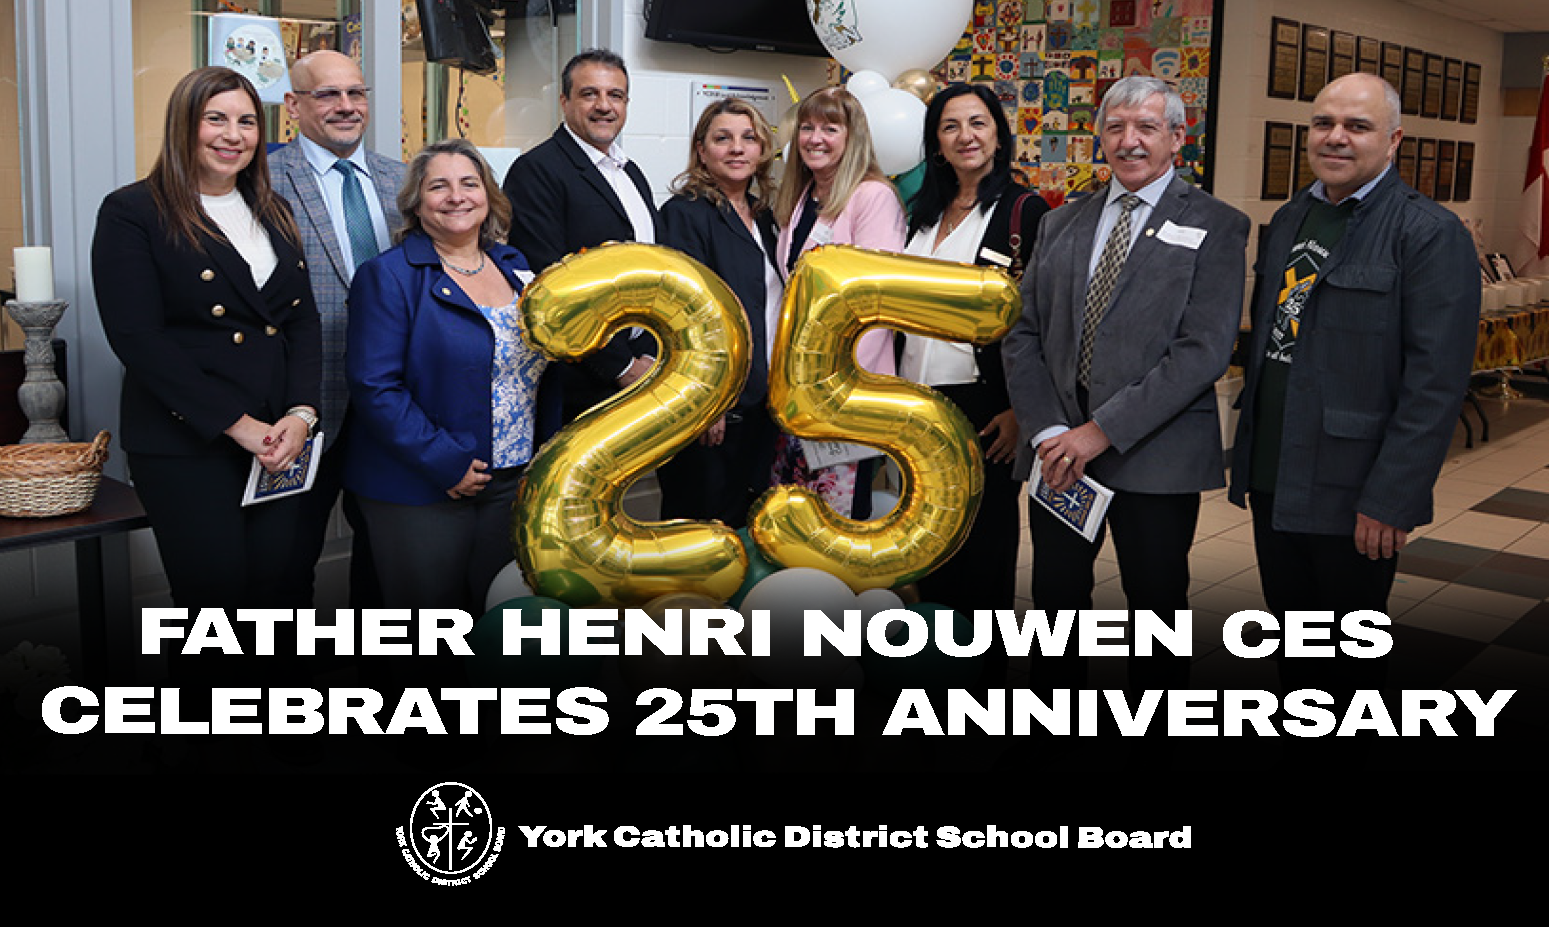 Trustees and administrators gather to celebrate Father Henri J.M. Nouwen's 25th anniversary